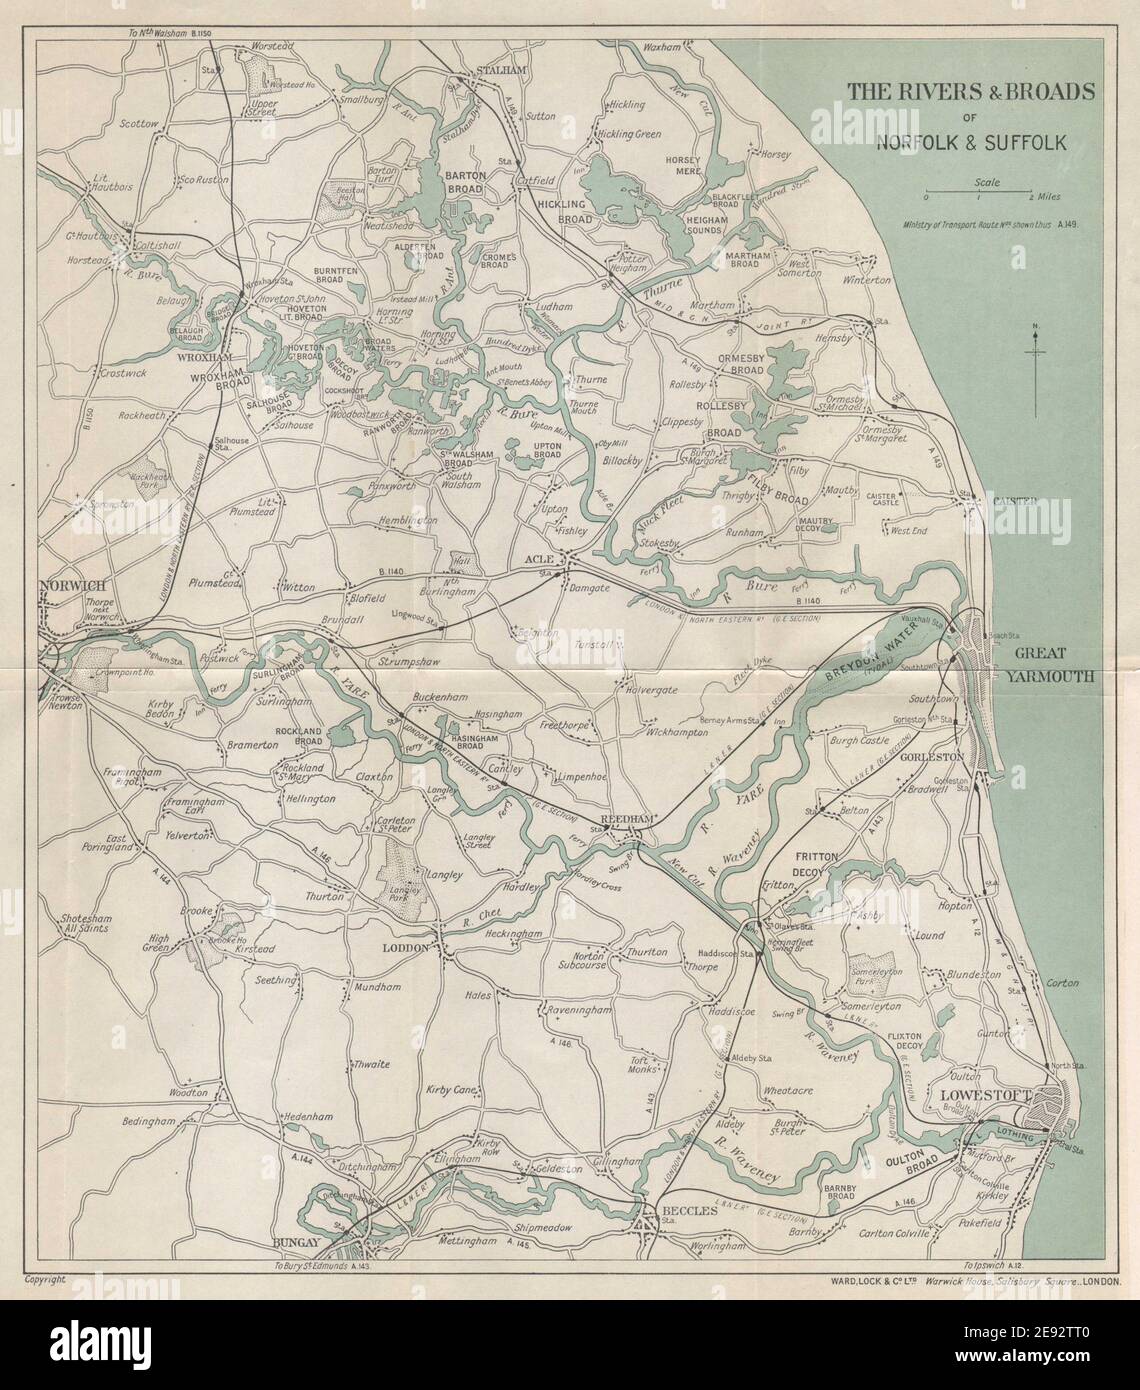 DIE NORFOLK BROADS. Tolles Yarmouth Lowestoft Beccles Norwich. STATIONSSCHLOSS 1937 MAP Stockfoto